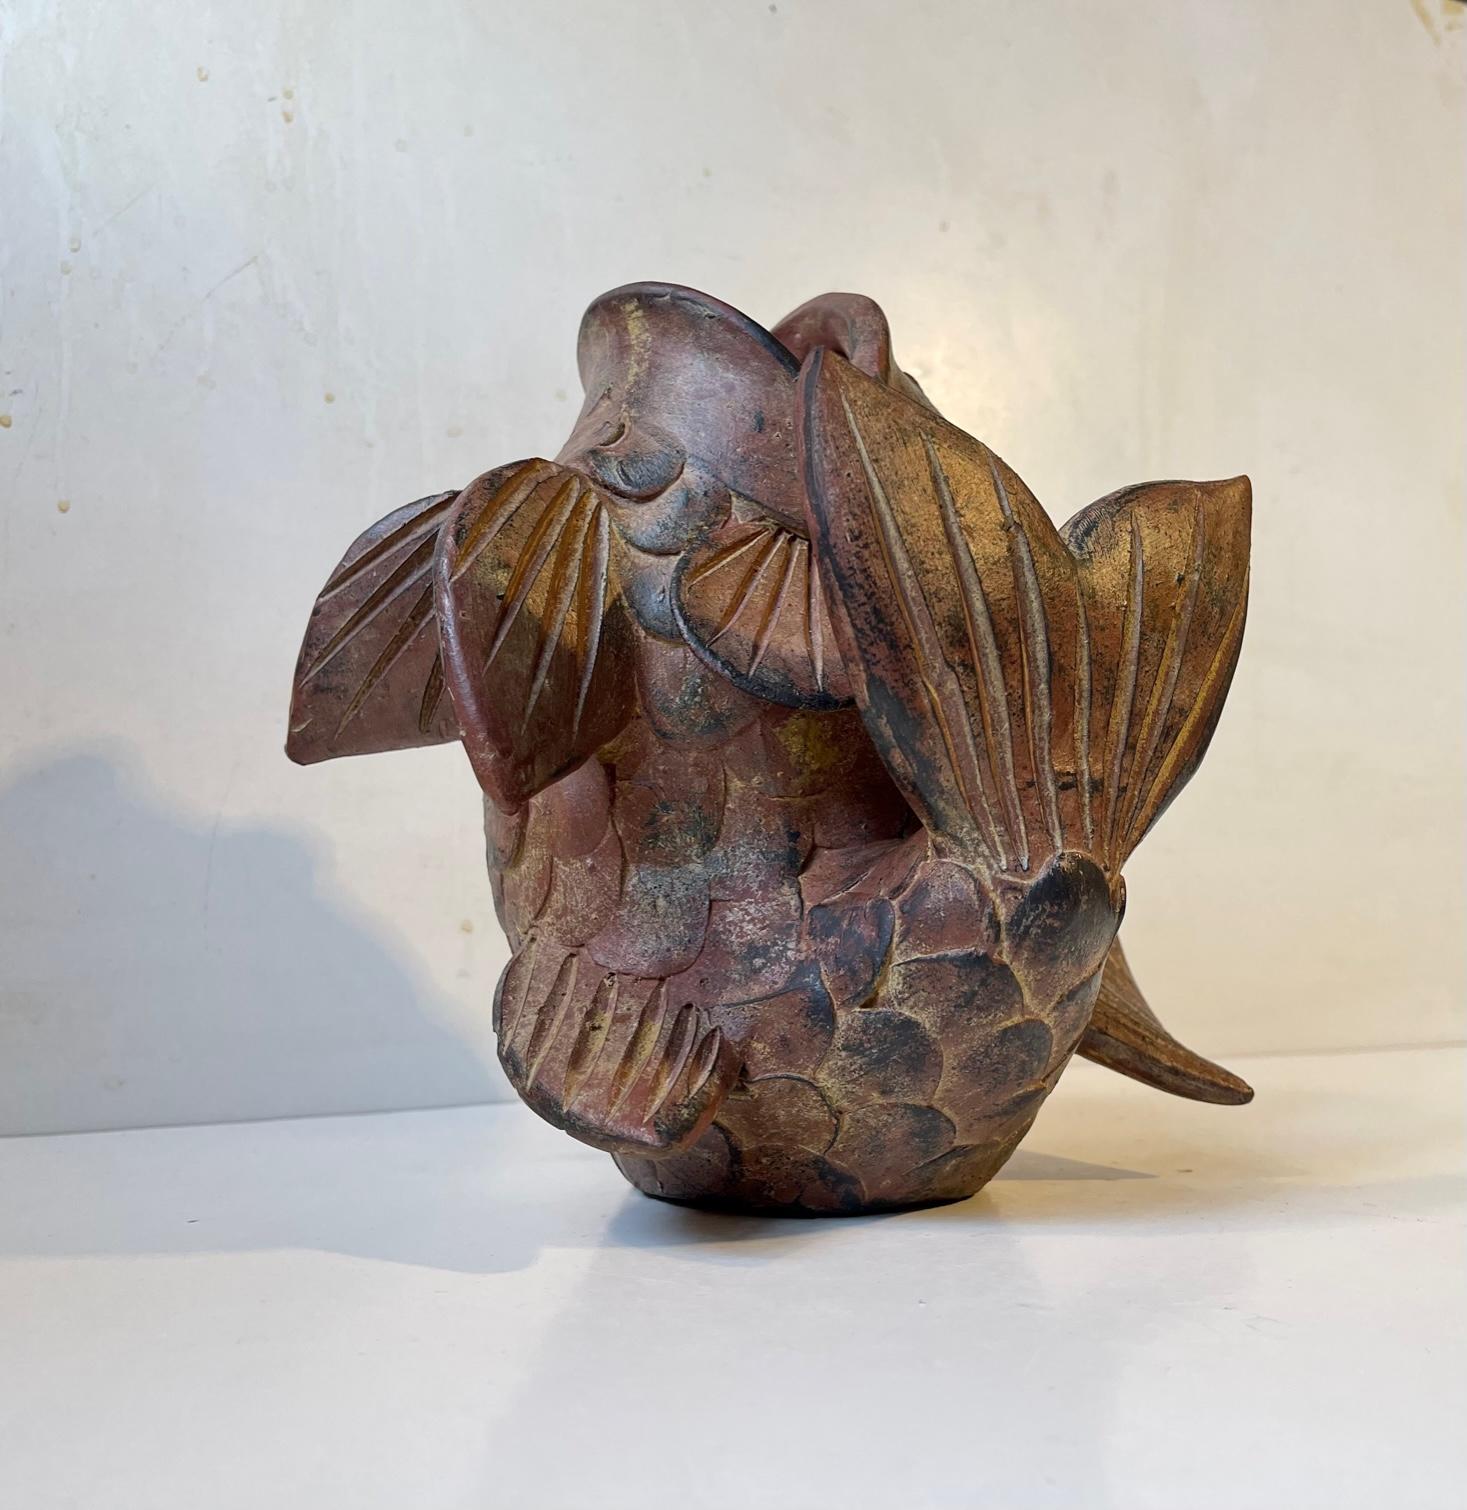 A sculptural Koi Fish vase in a tri-dimensional design. Its made from heigh-burnt terra cotta. It was made in Asia, possibly Japan, in the 1950s or 60s. Its very well-kept, clean and intact. Measurements: approx. 24 x 24 x 17 cm.